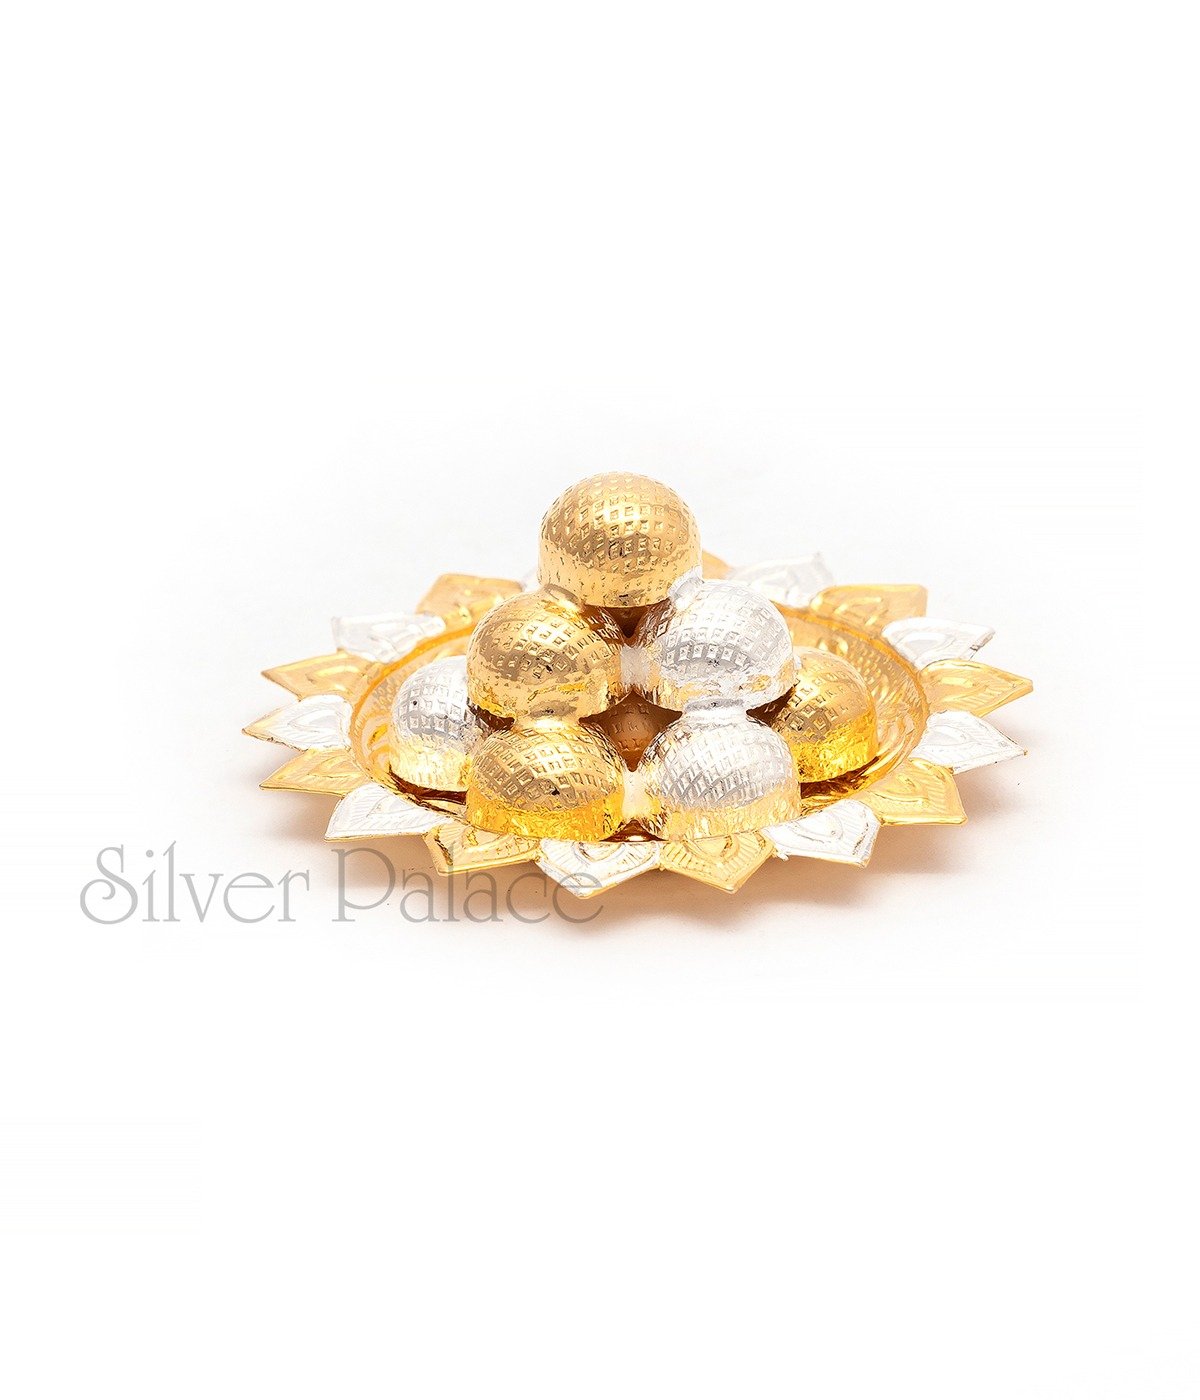 REAL SILVER GOLD PLATED LADDU PLATE FOR GANAPATHY PUJA